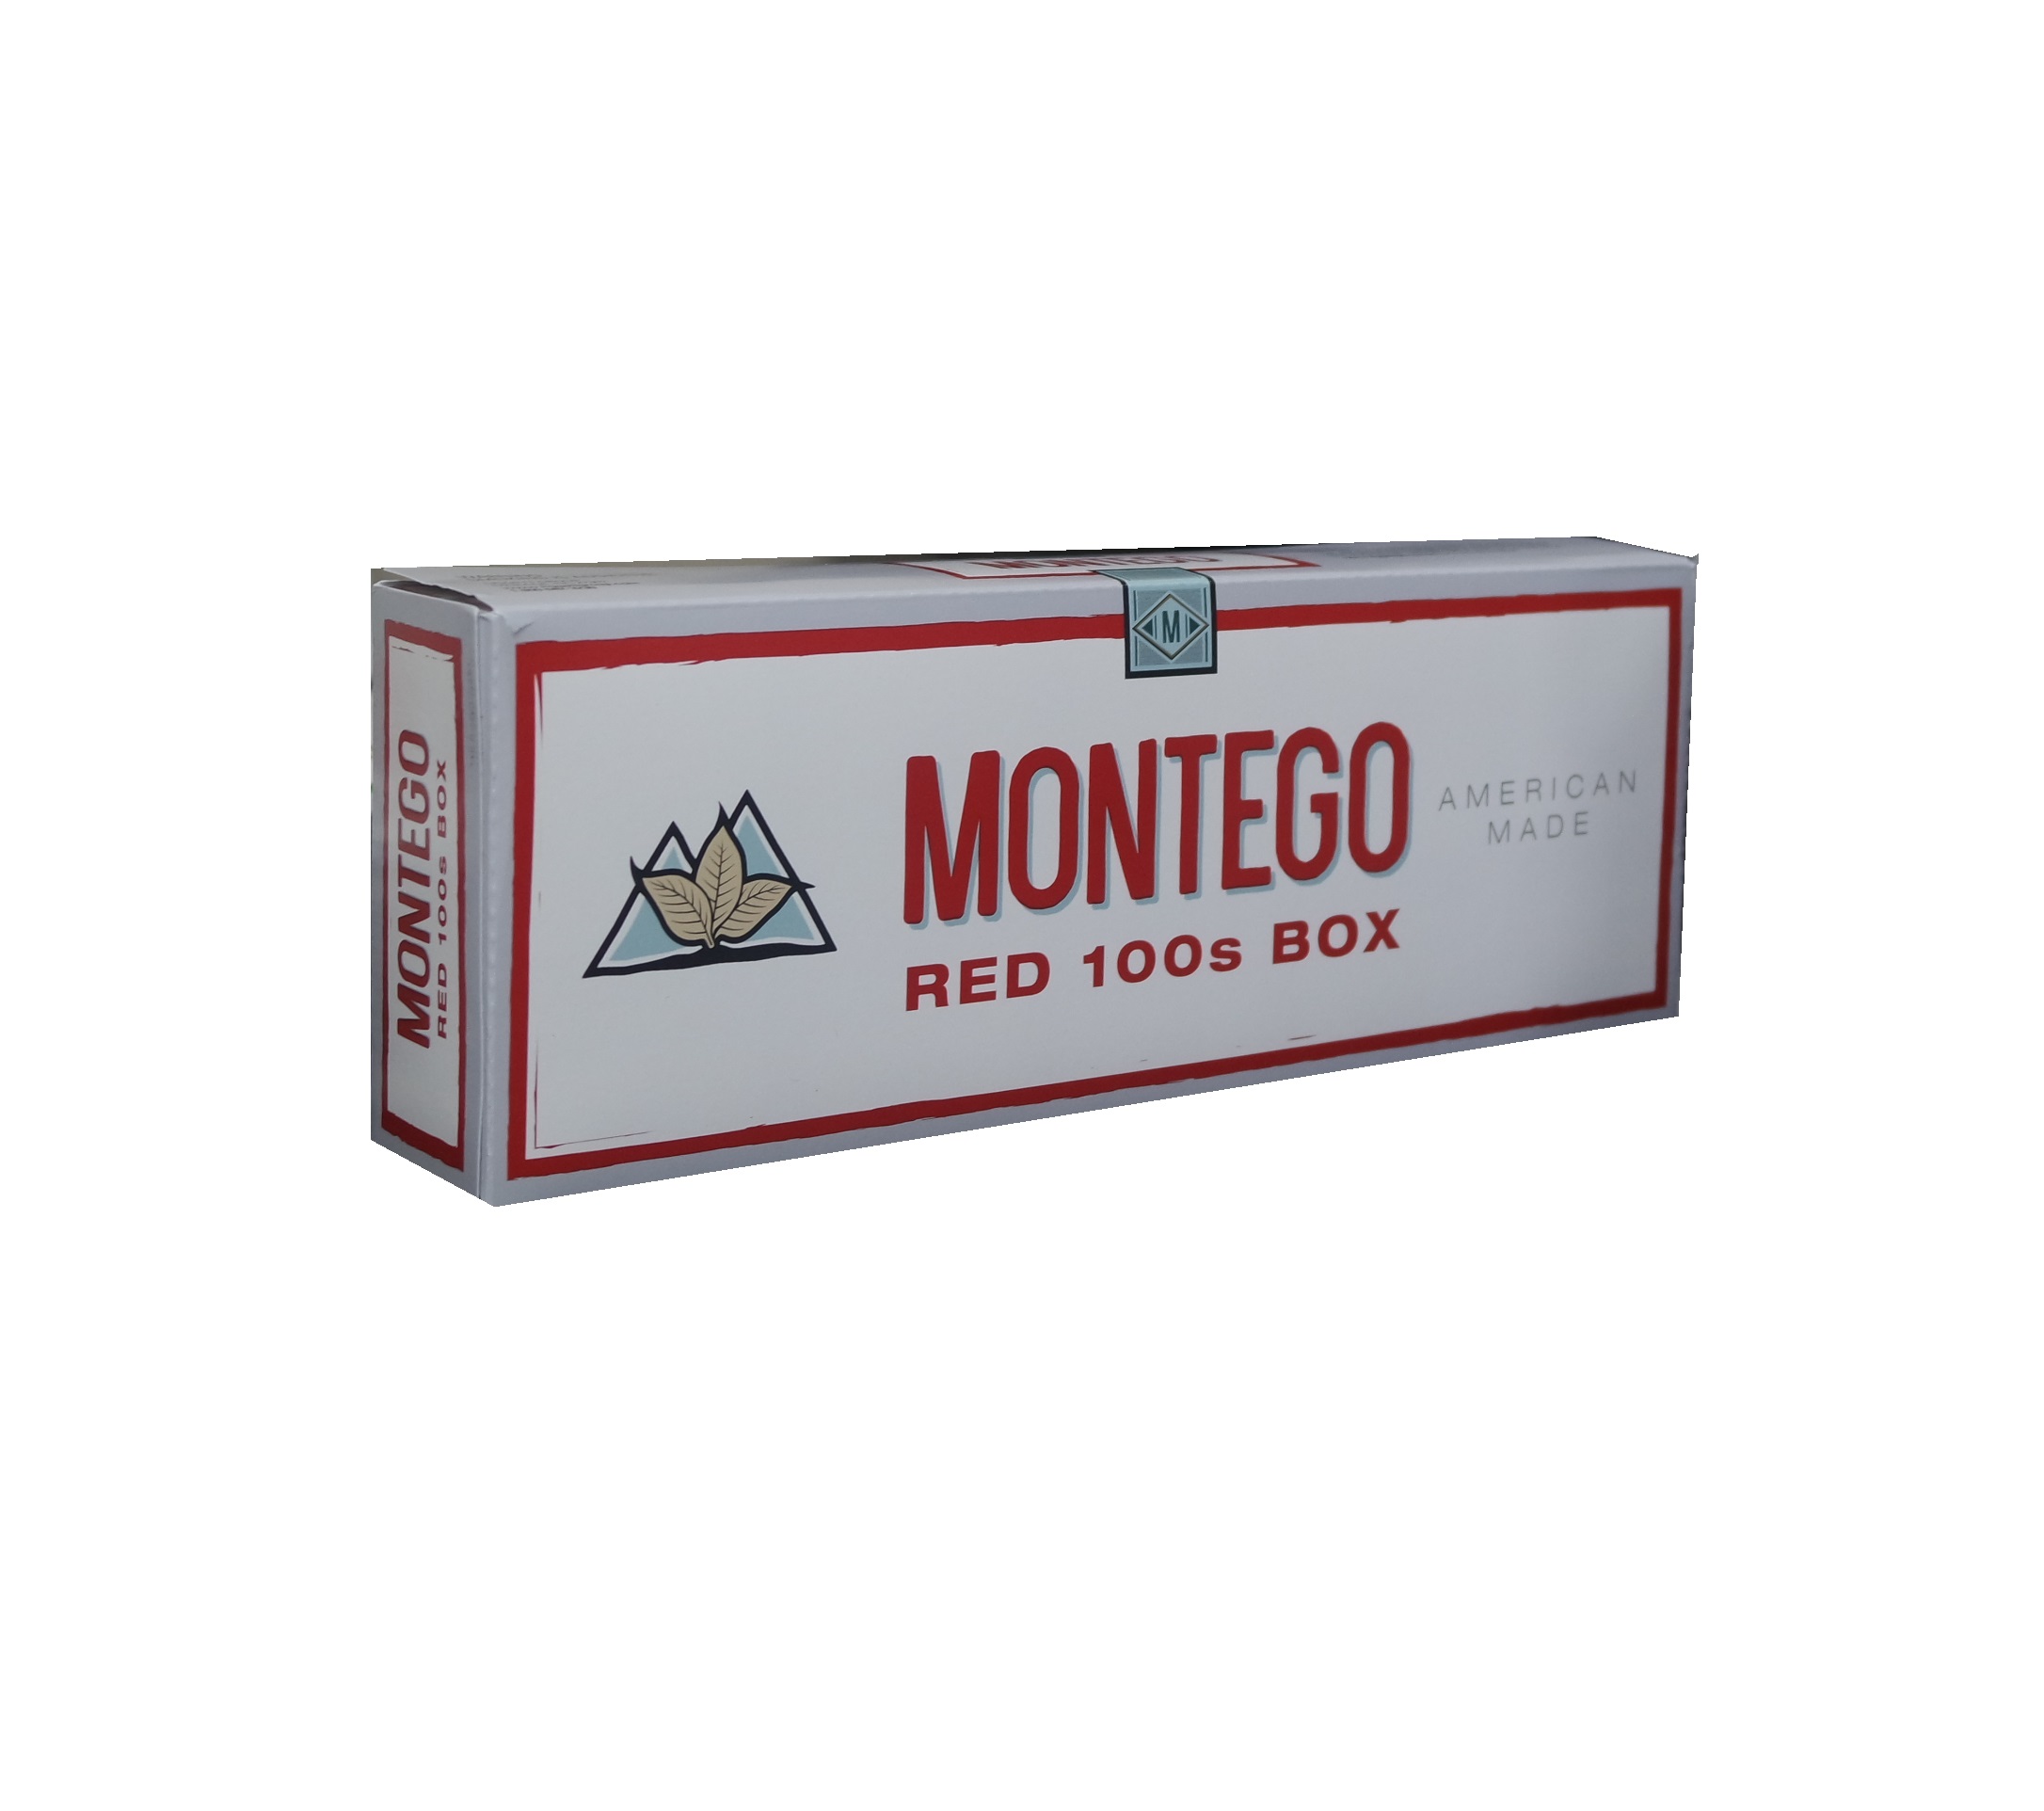 Montego red 100s box